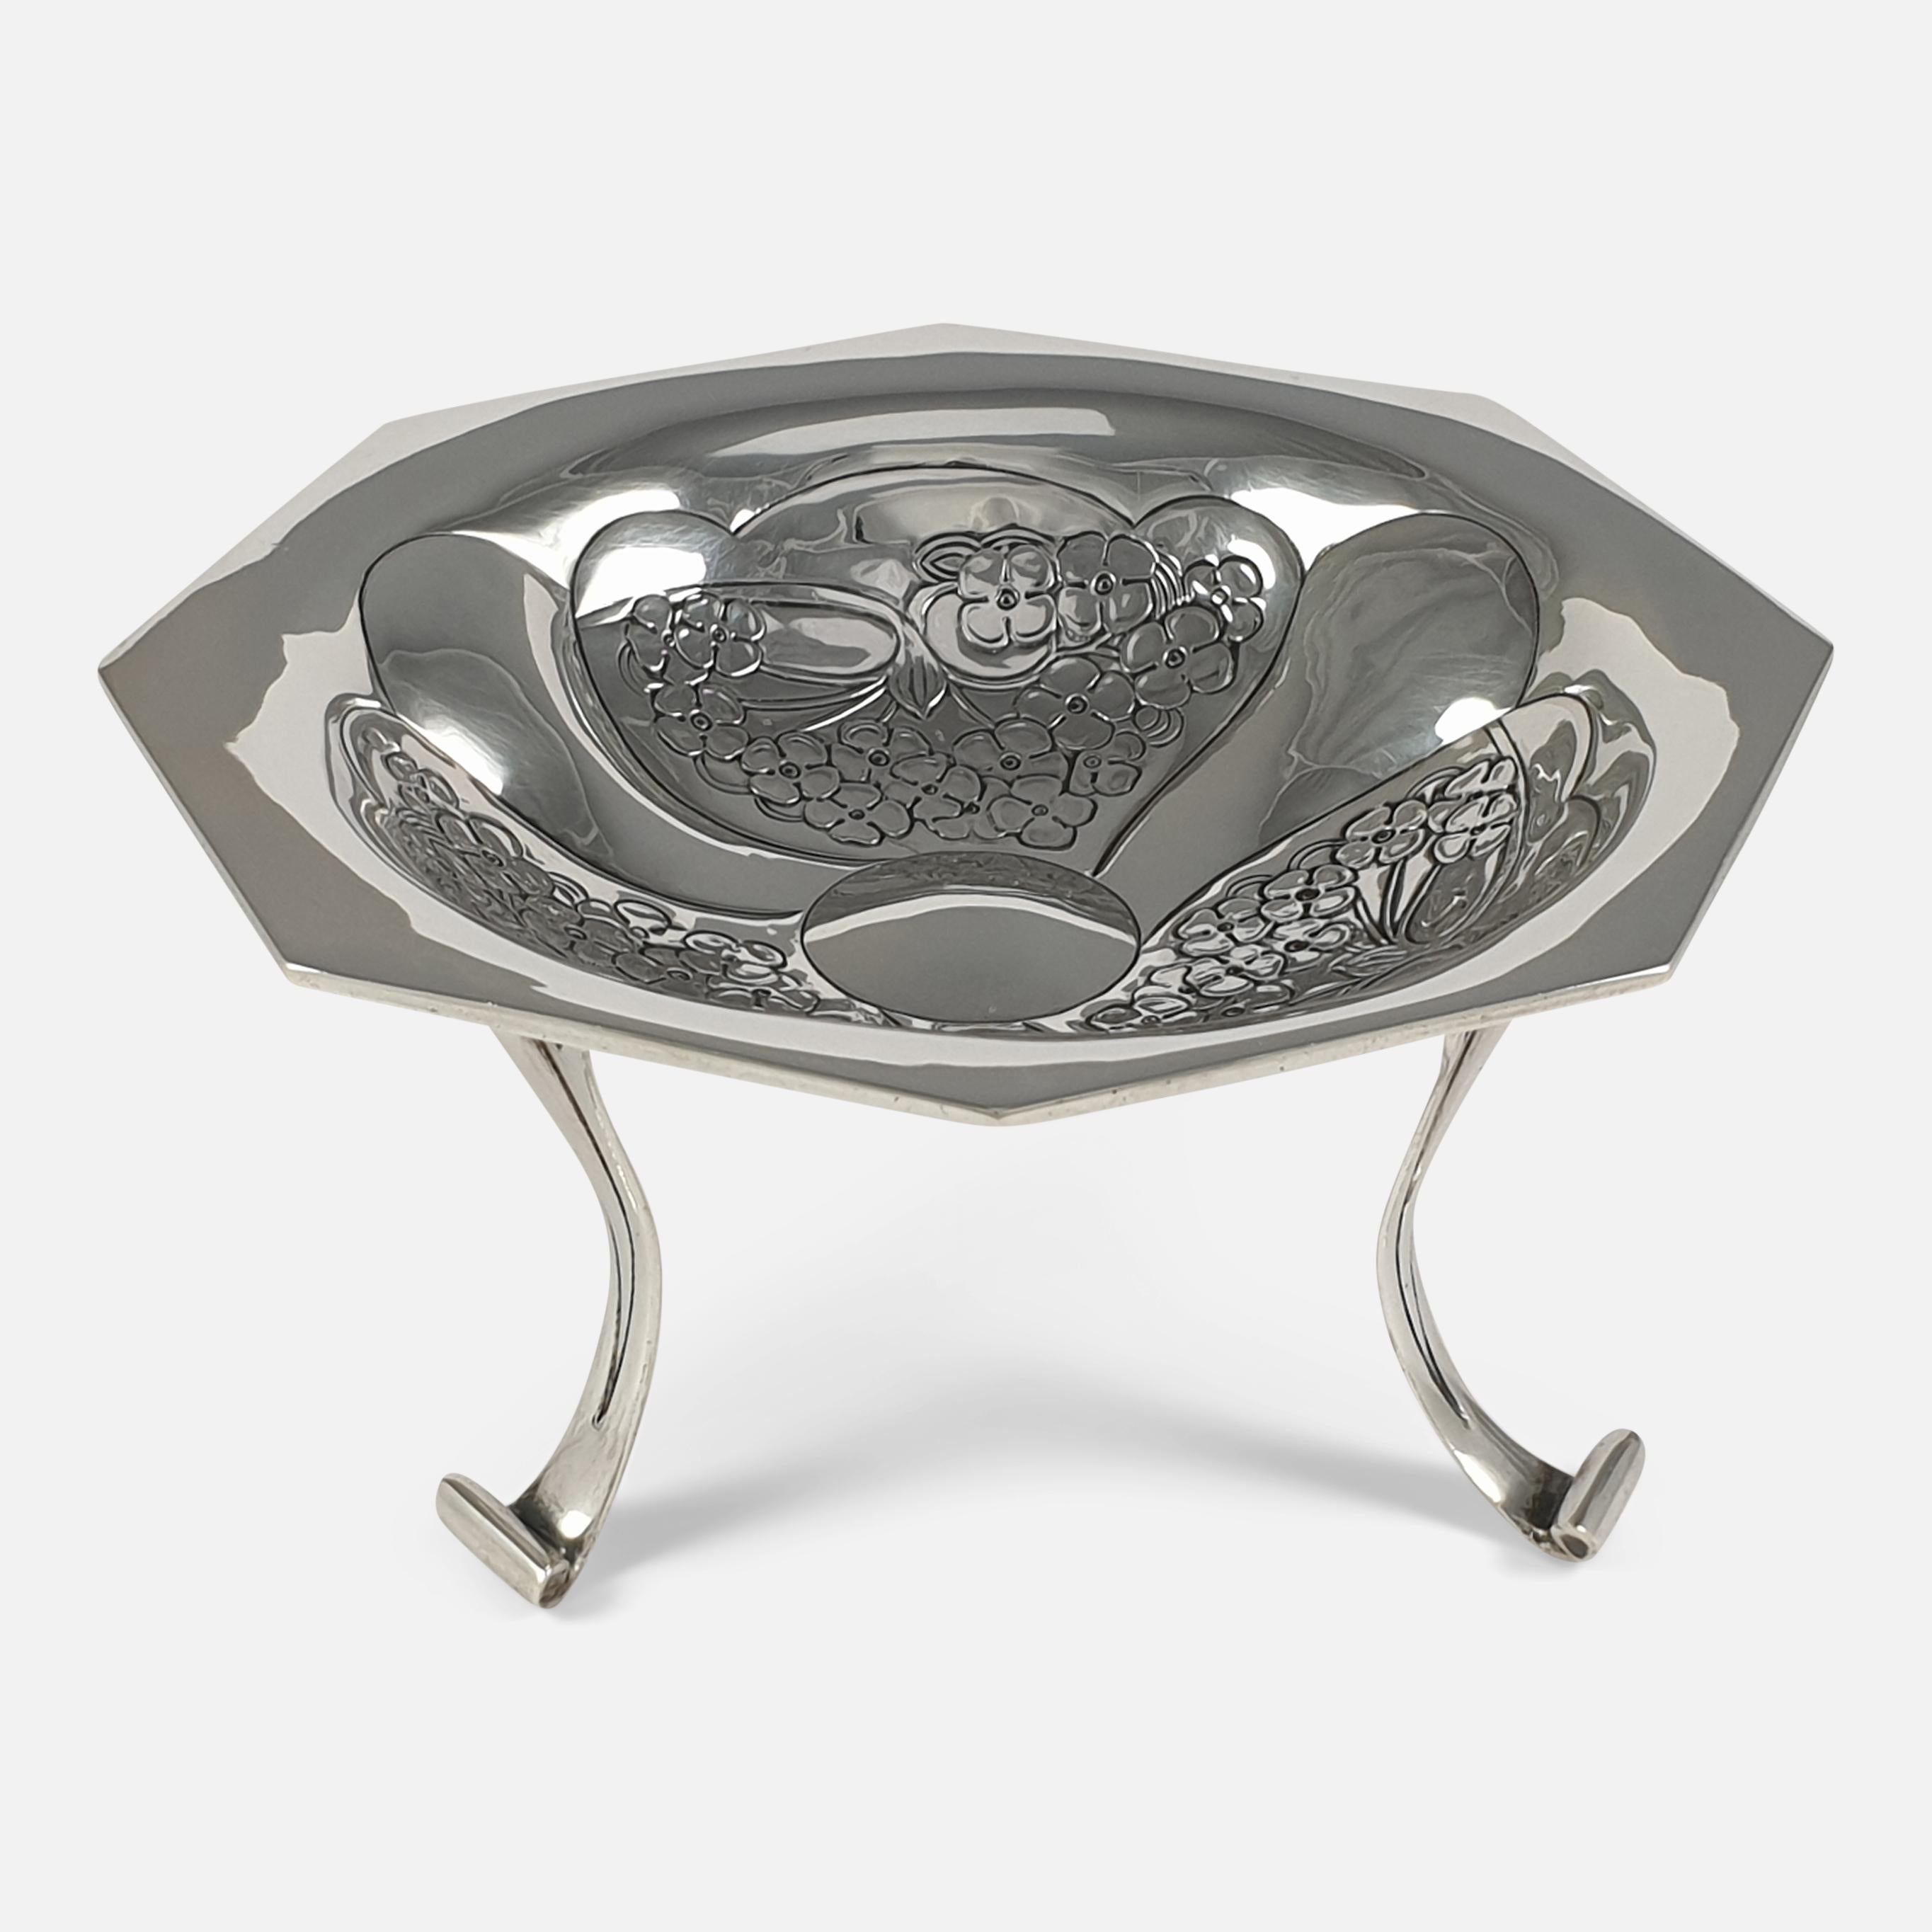 Edwardian Art Nouveau Silver Tazza by Kate Harris for W.G. Connell, 1901 For Sale 4